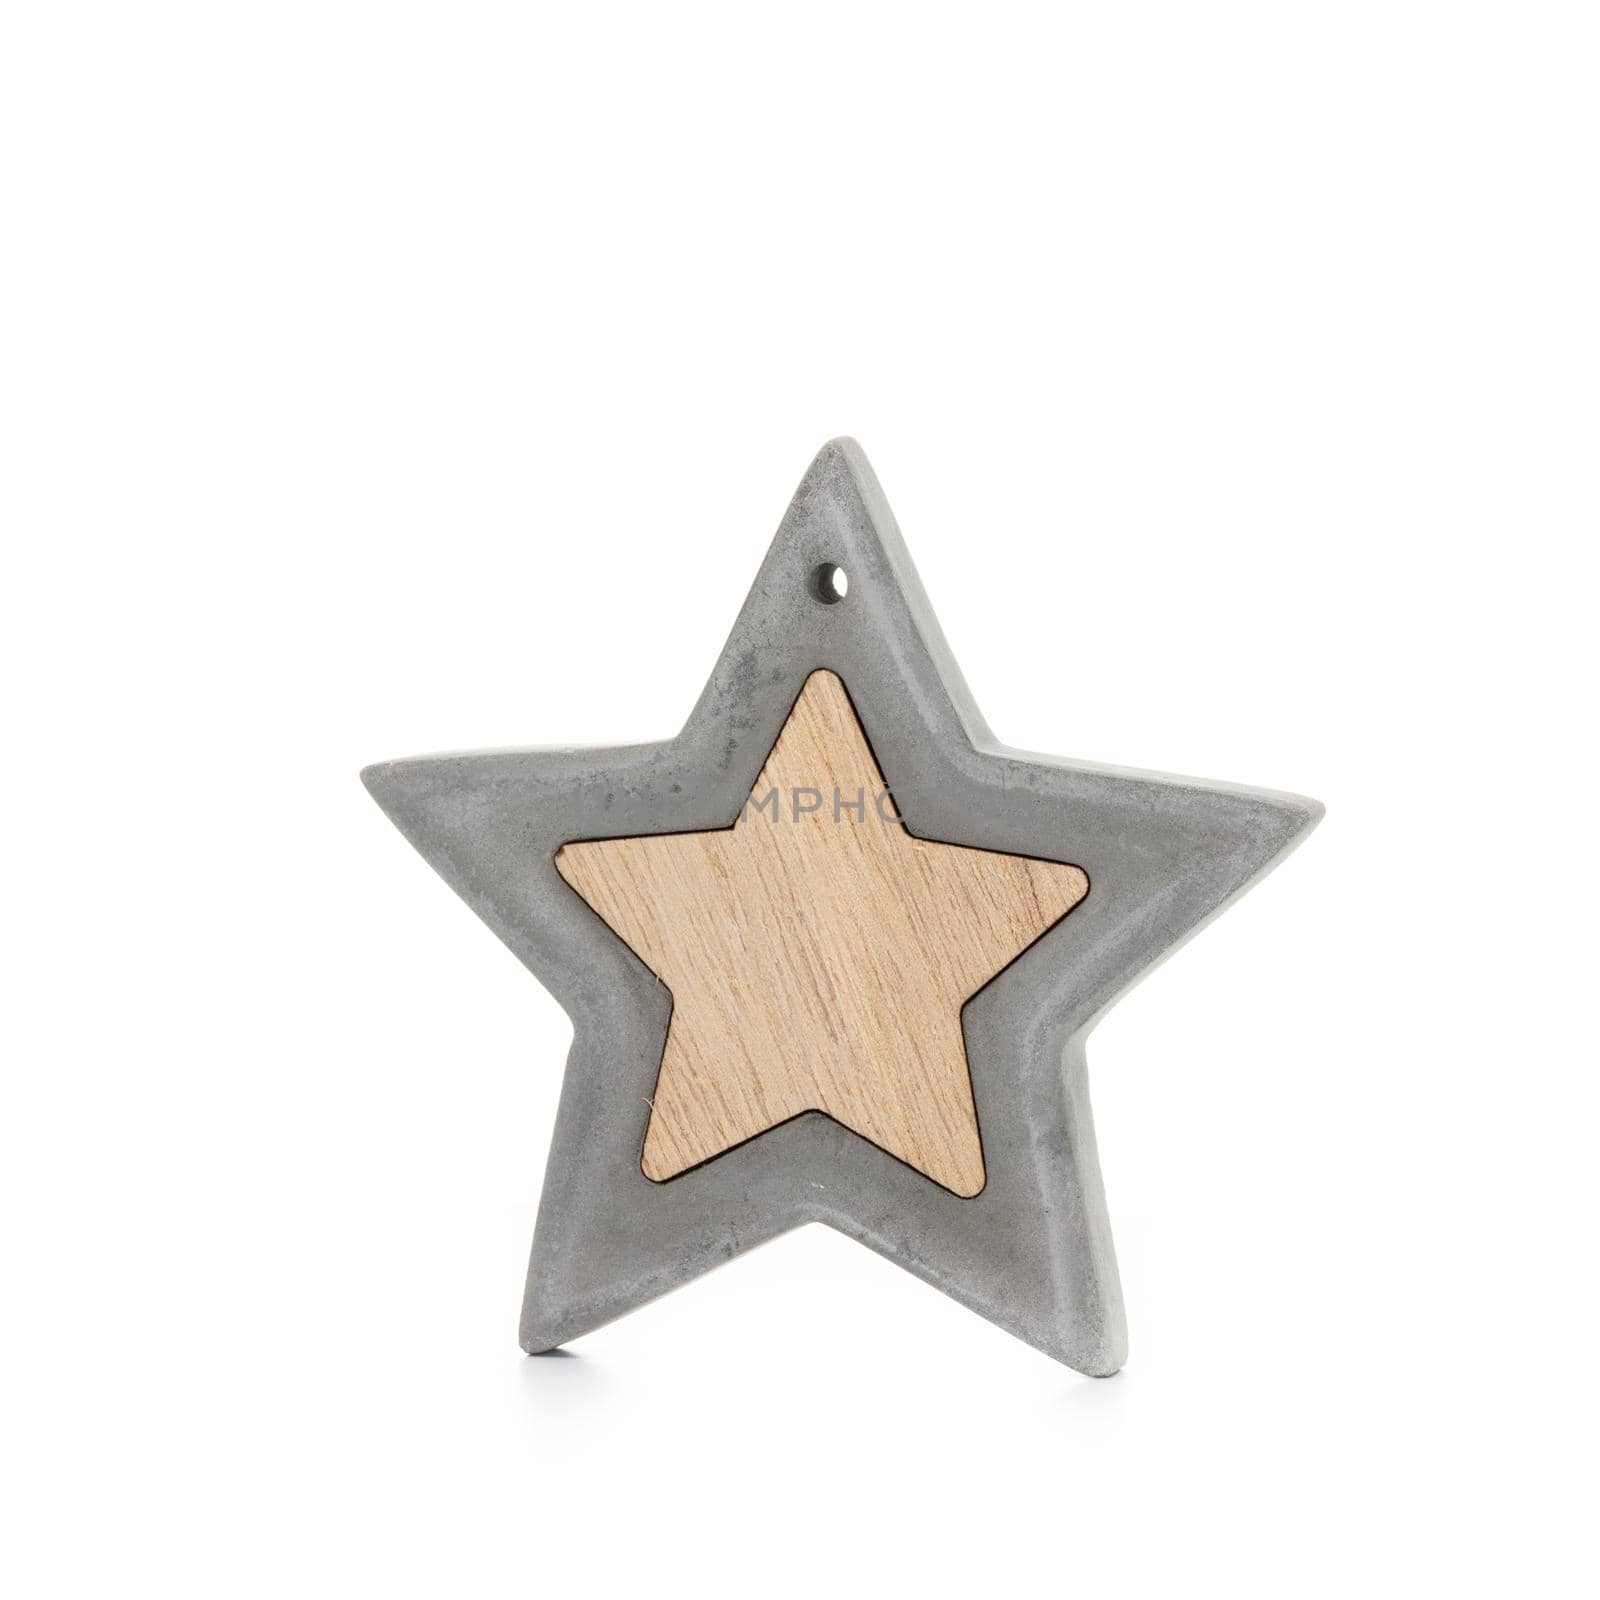 Christmas star isolated on a white background.